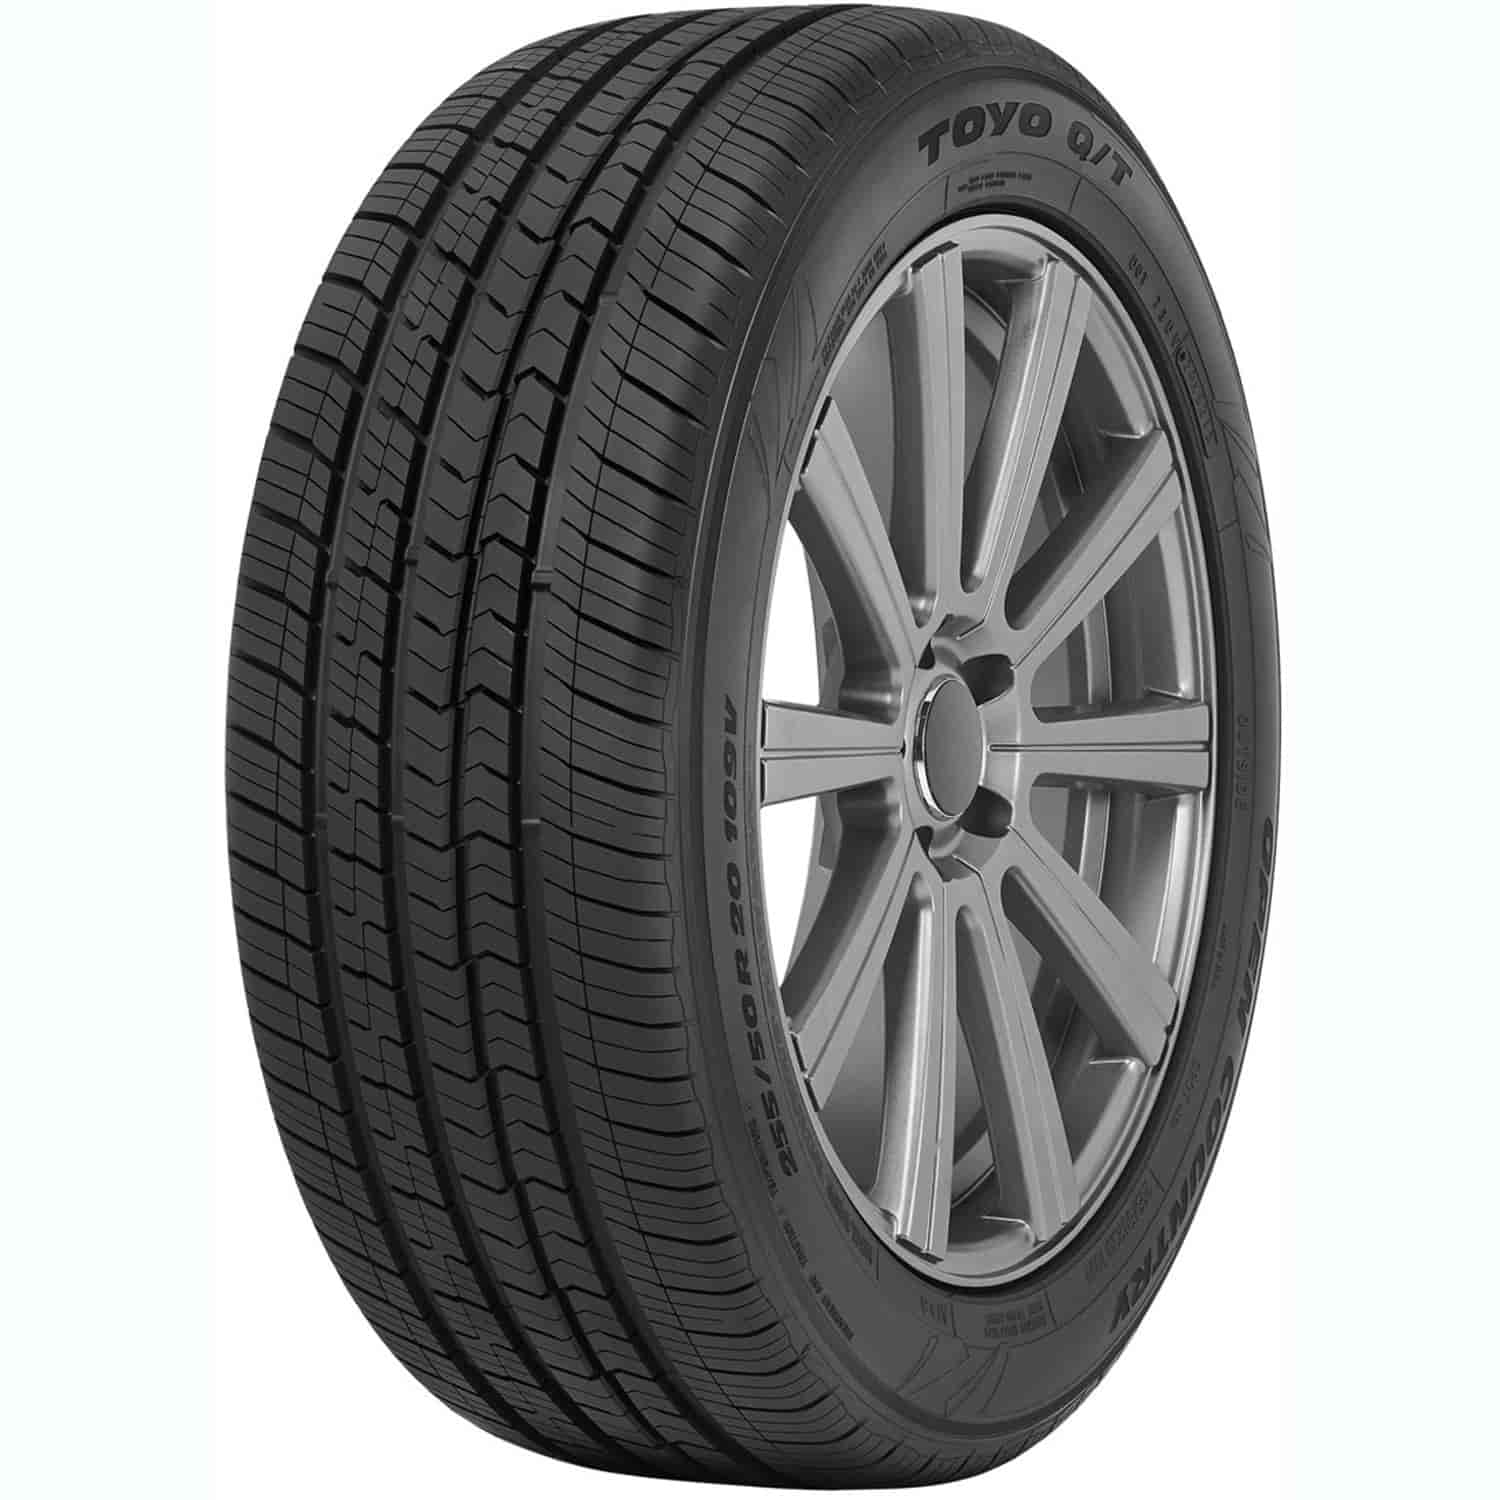 OPEN COUNTRY Q/T 265/50R19 110V XL